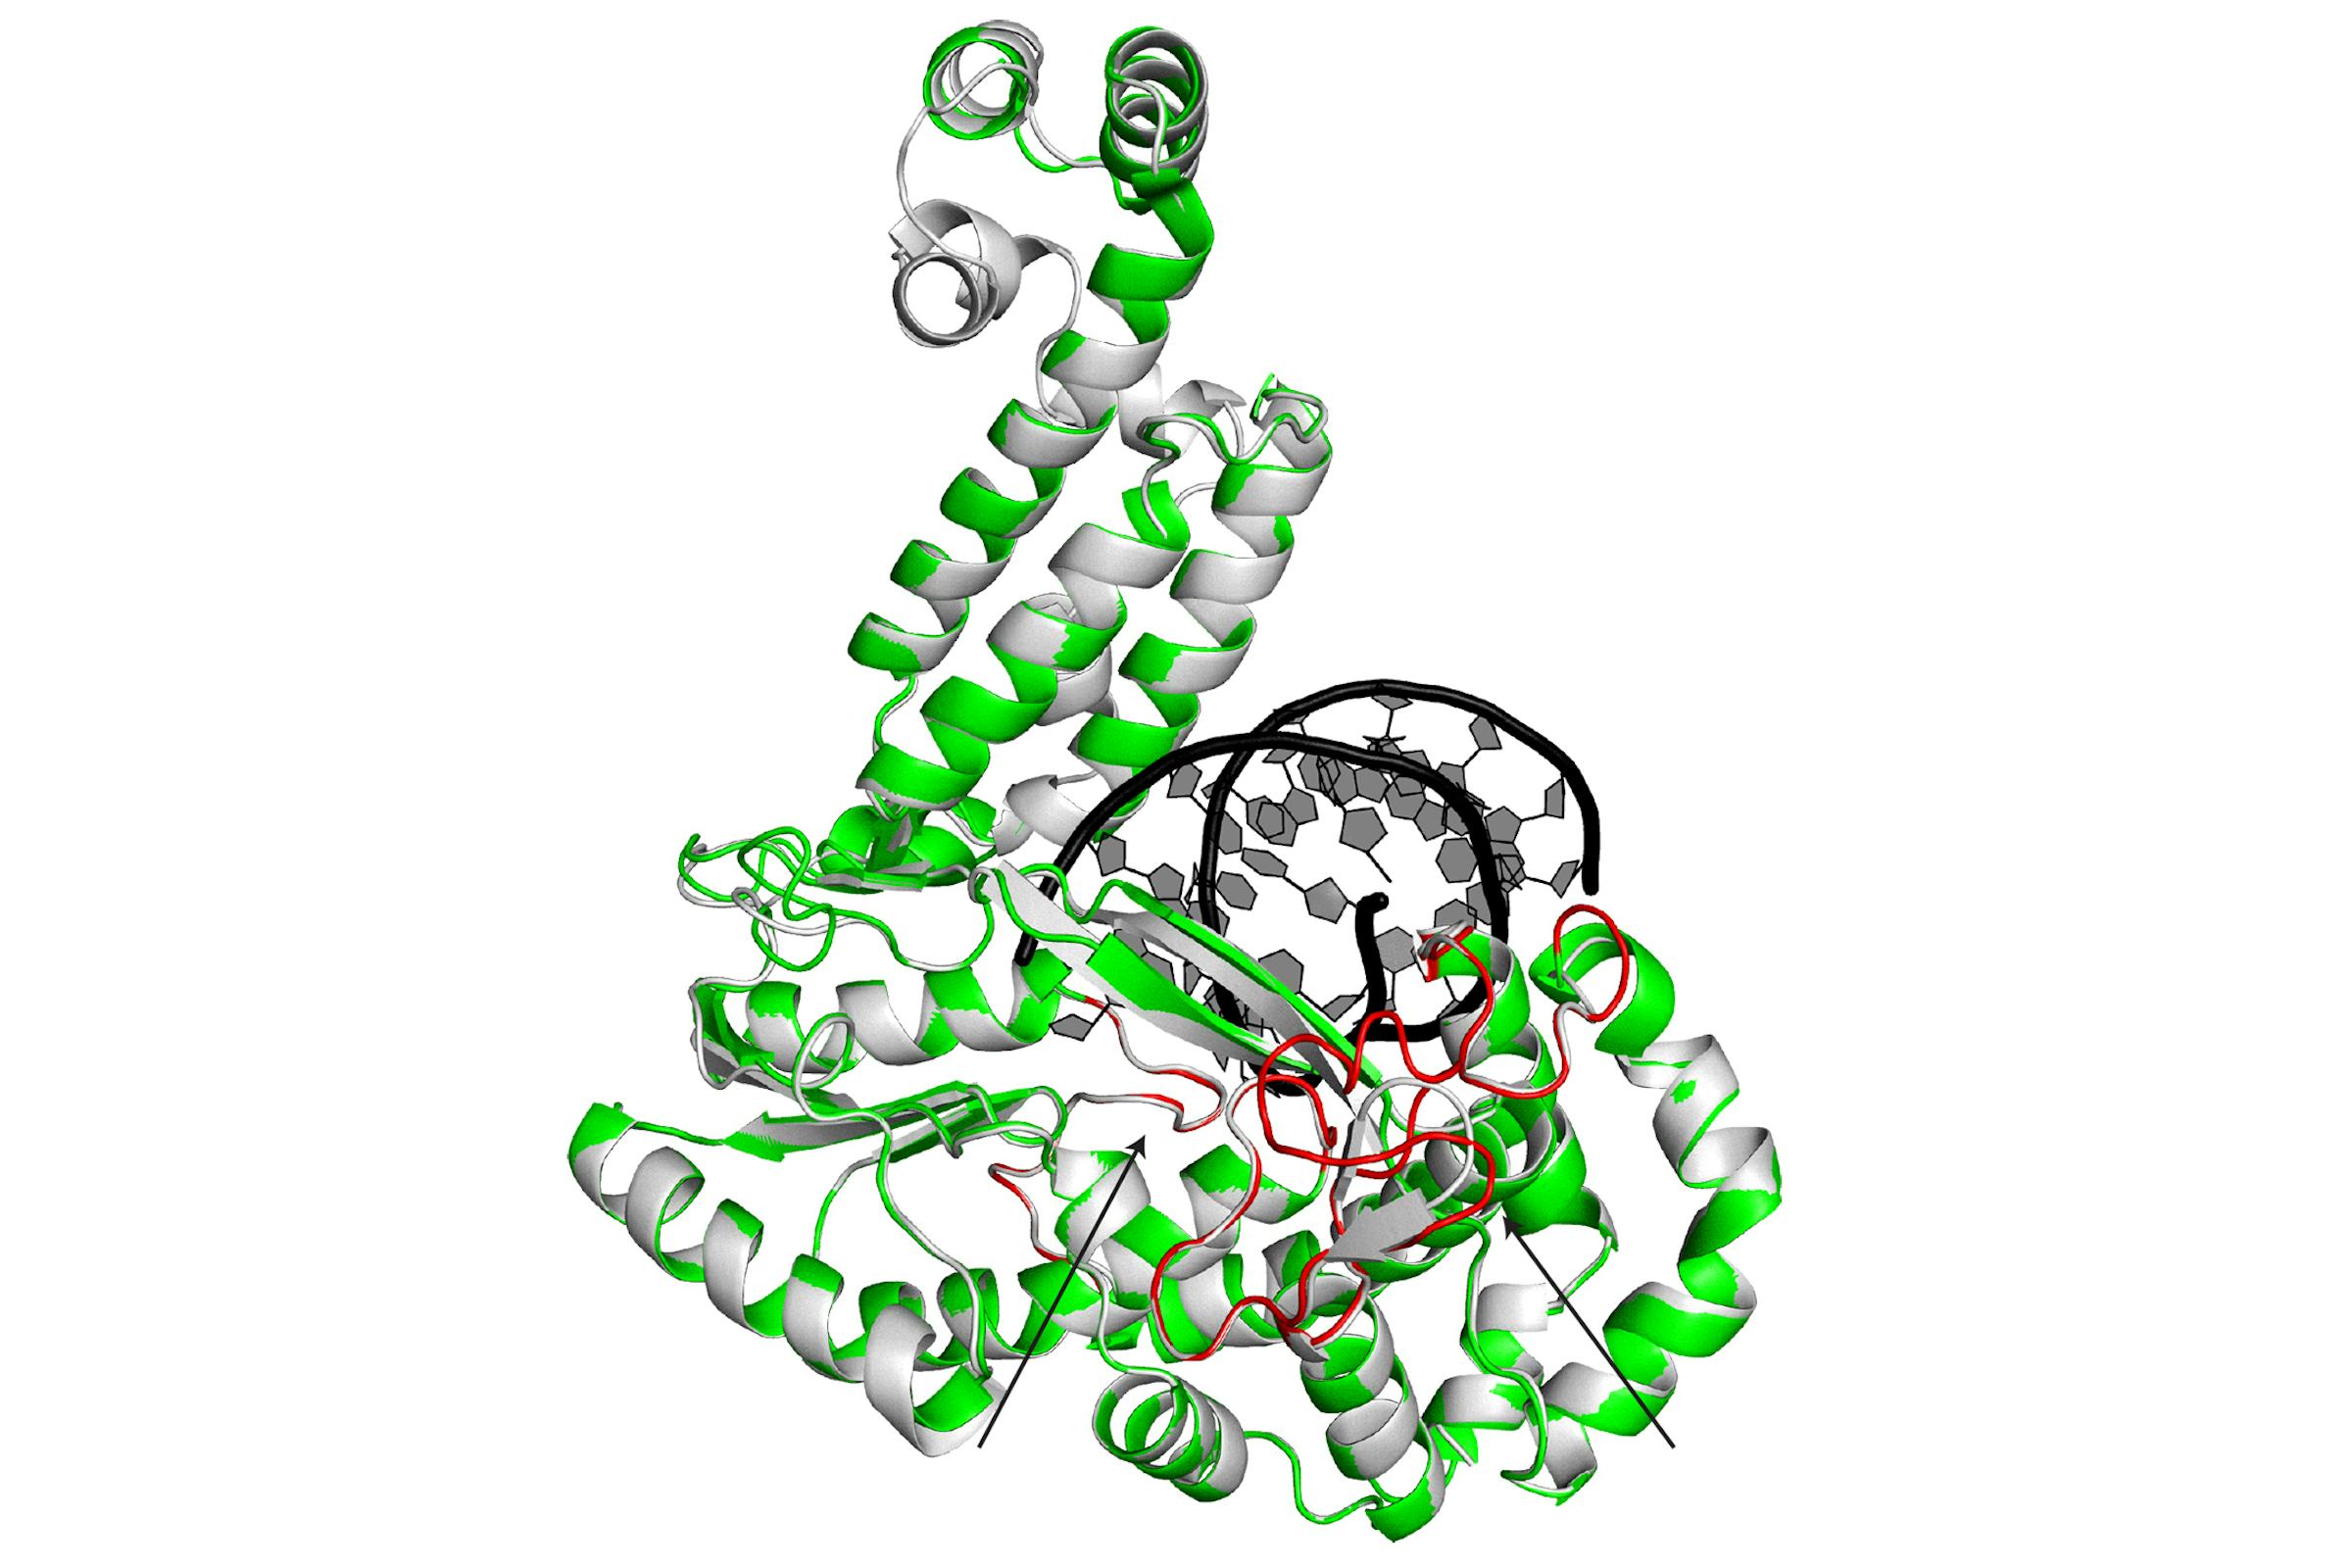 Illustration of a protein that looks like a tangle of curled ribbons in white, grey and green